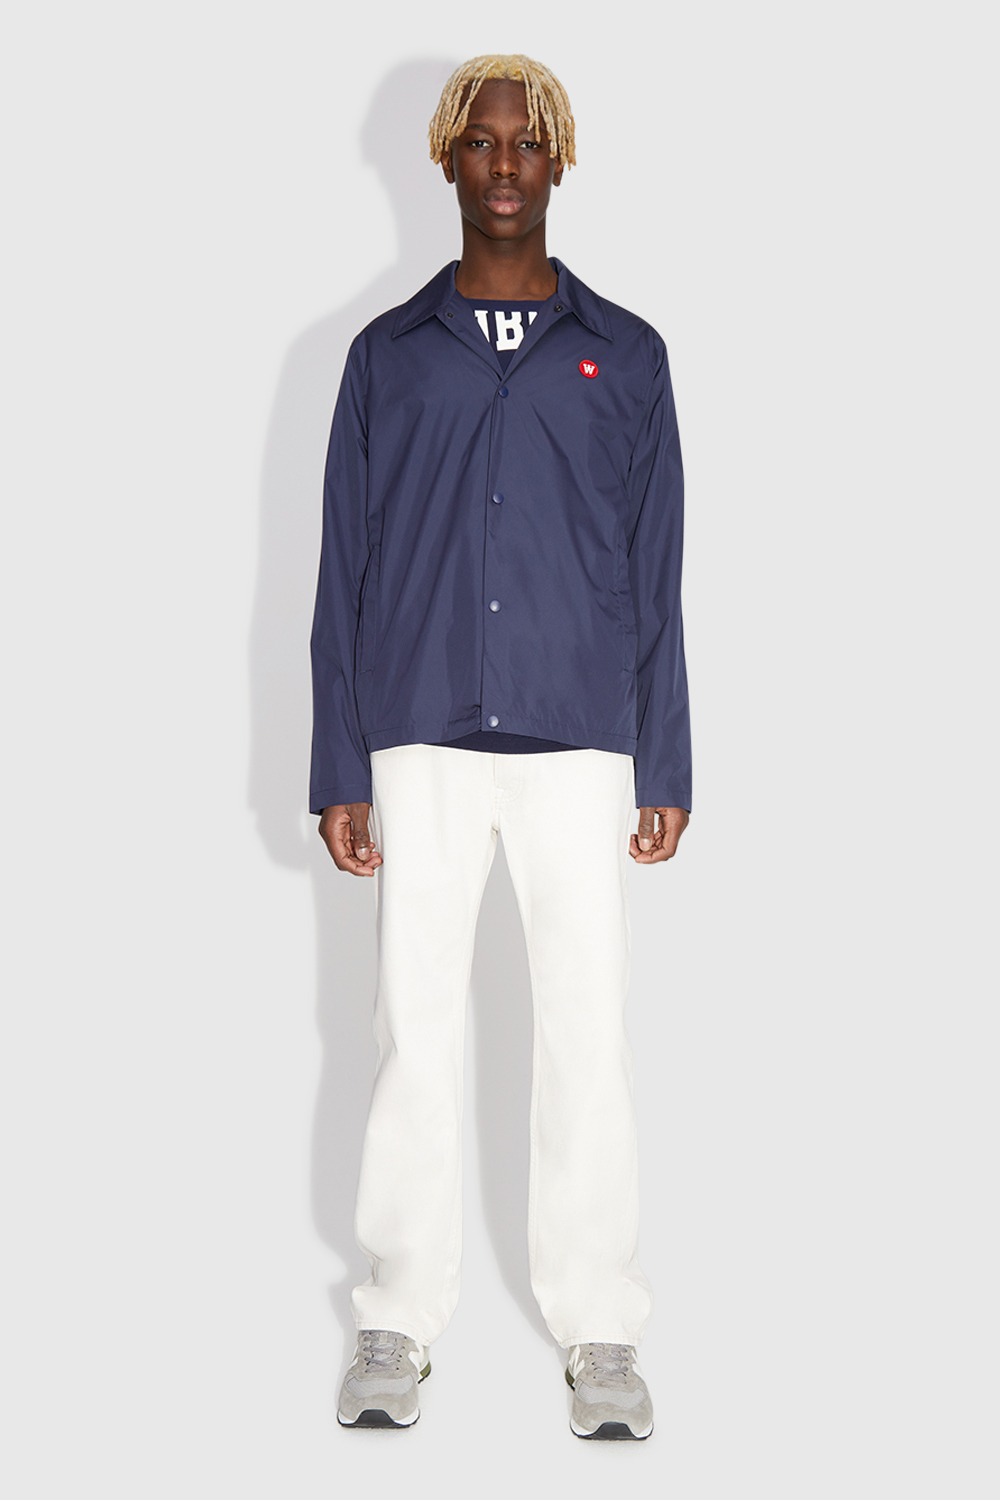 Double A by Wood Wood Ali coach jacket Navy 